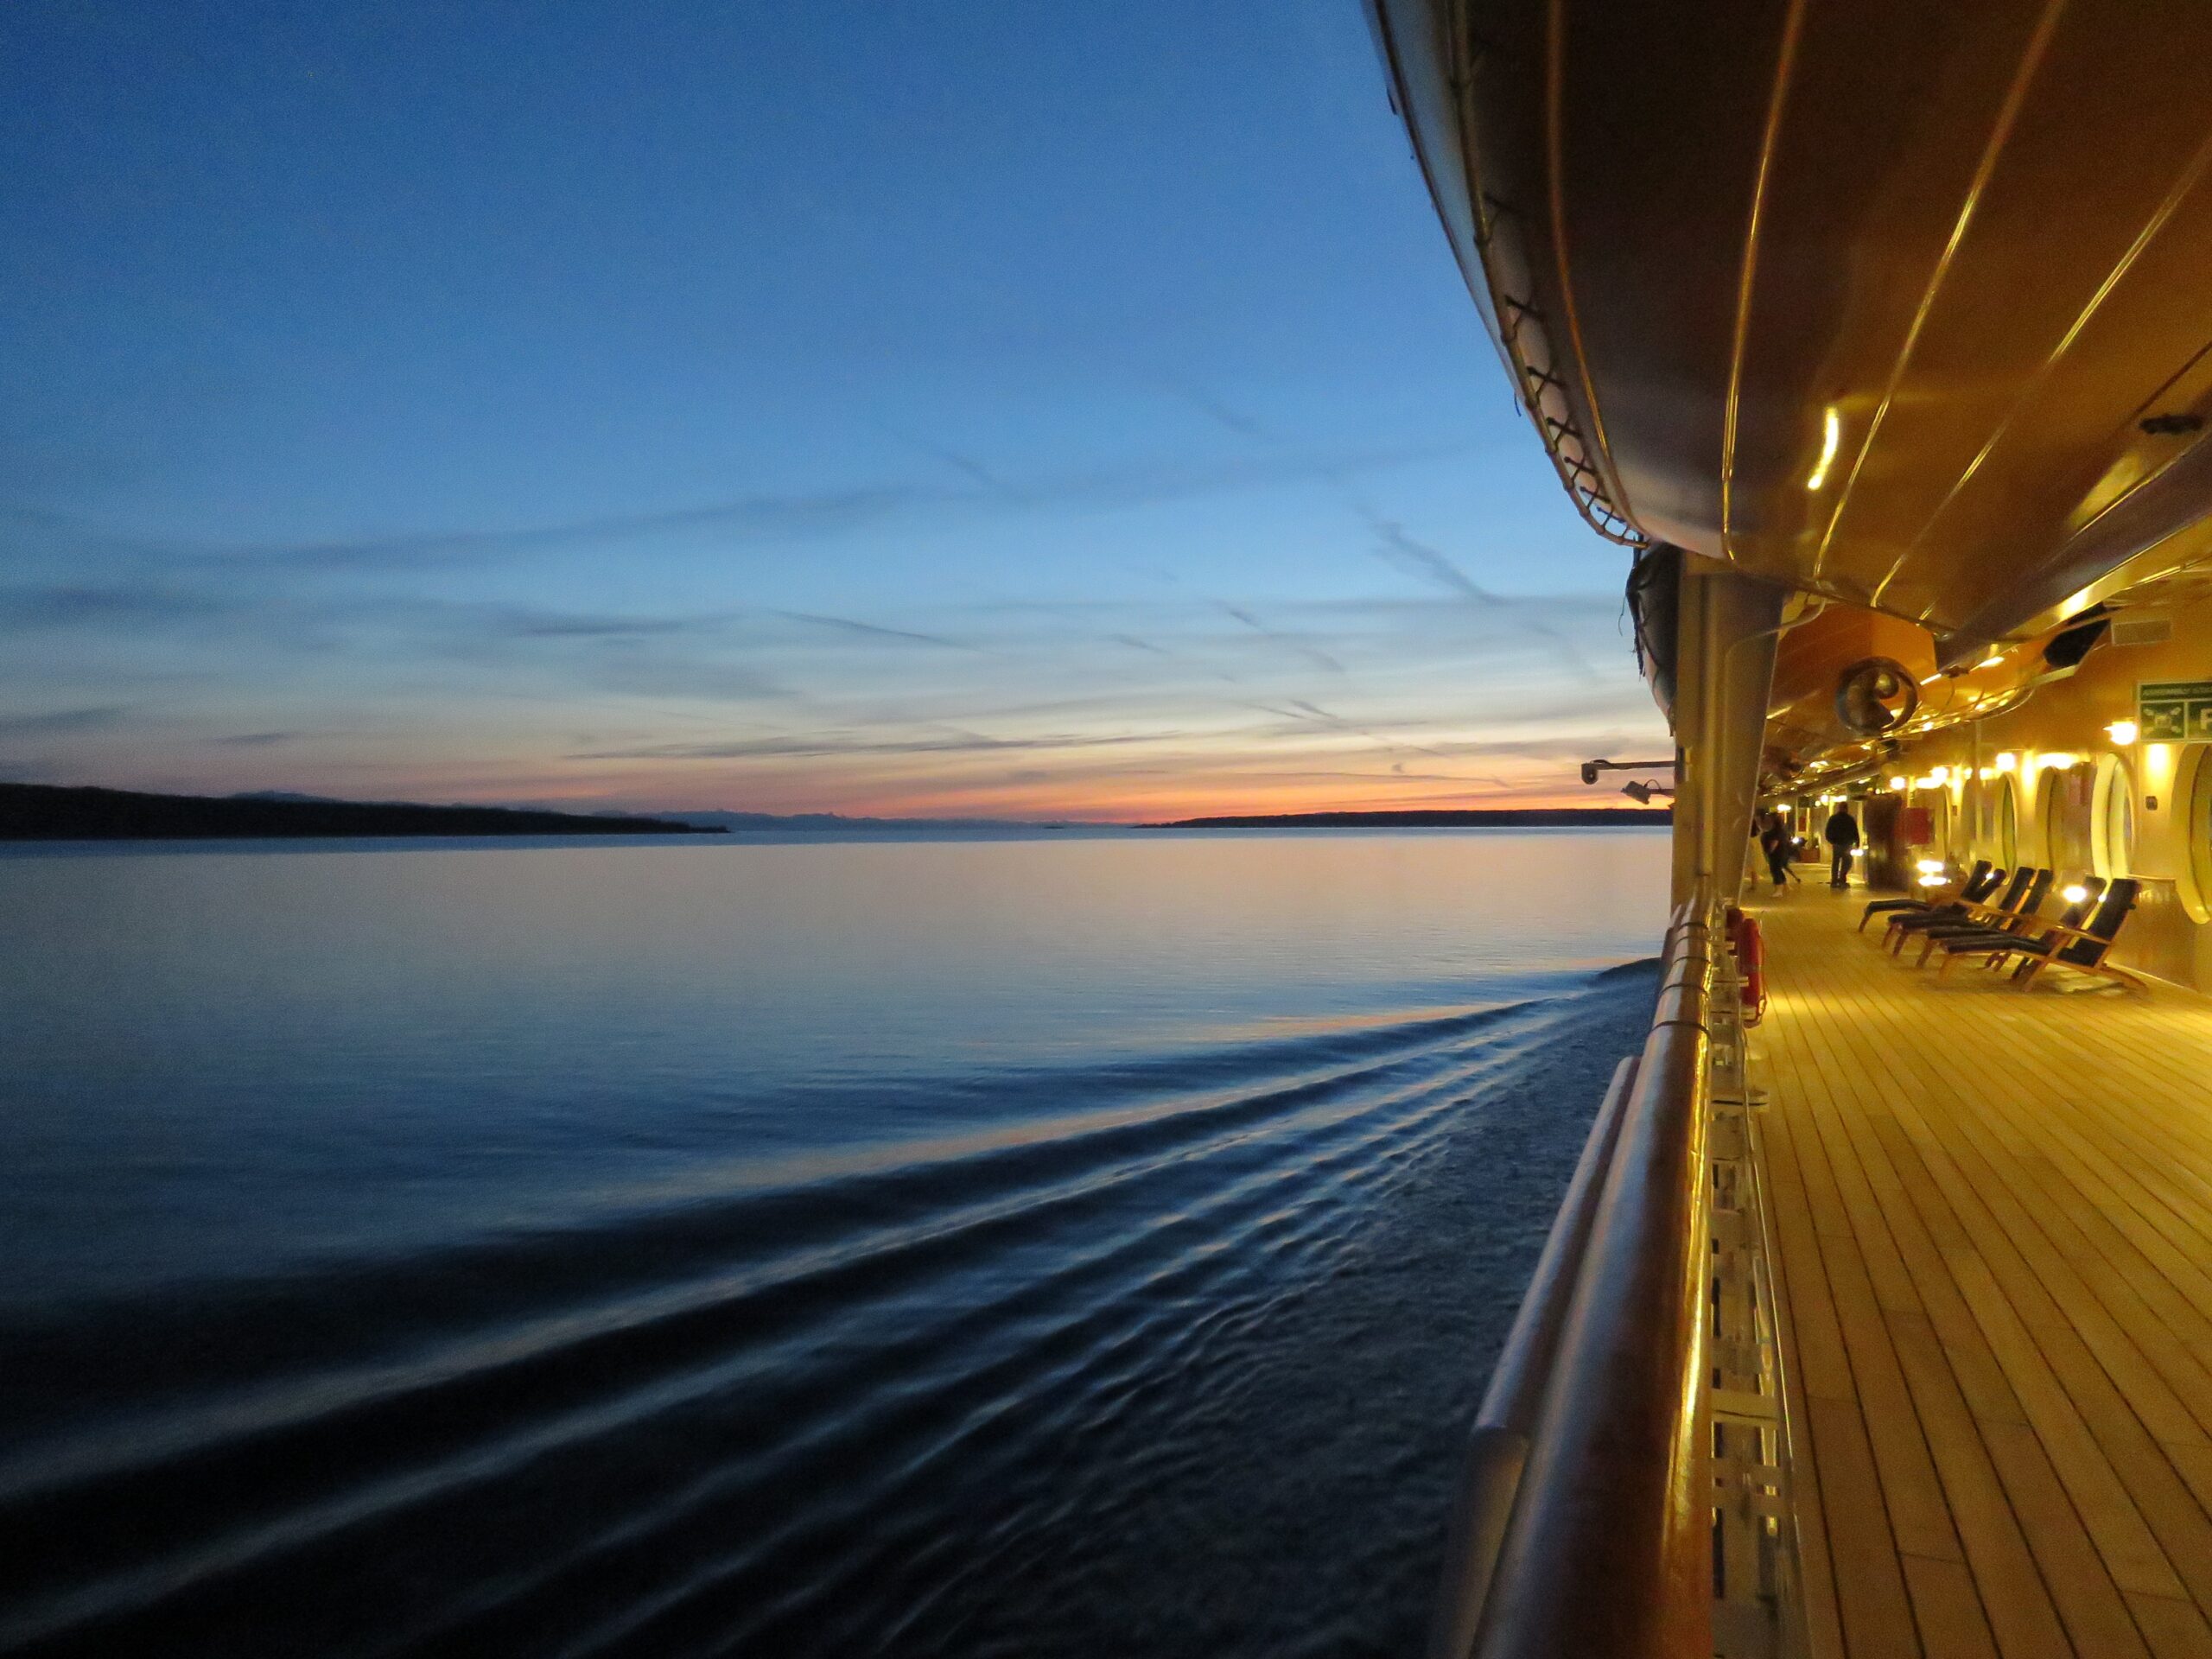 Learn more about the Margaritaville cruises that are available to travelers. 
pictured: a view from a cruise ship after sunset overlooking the sea